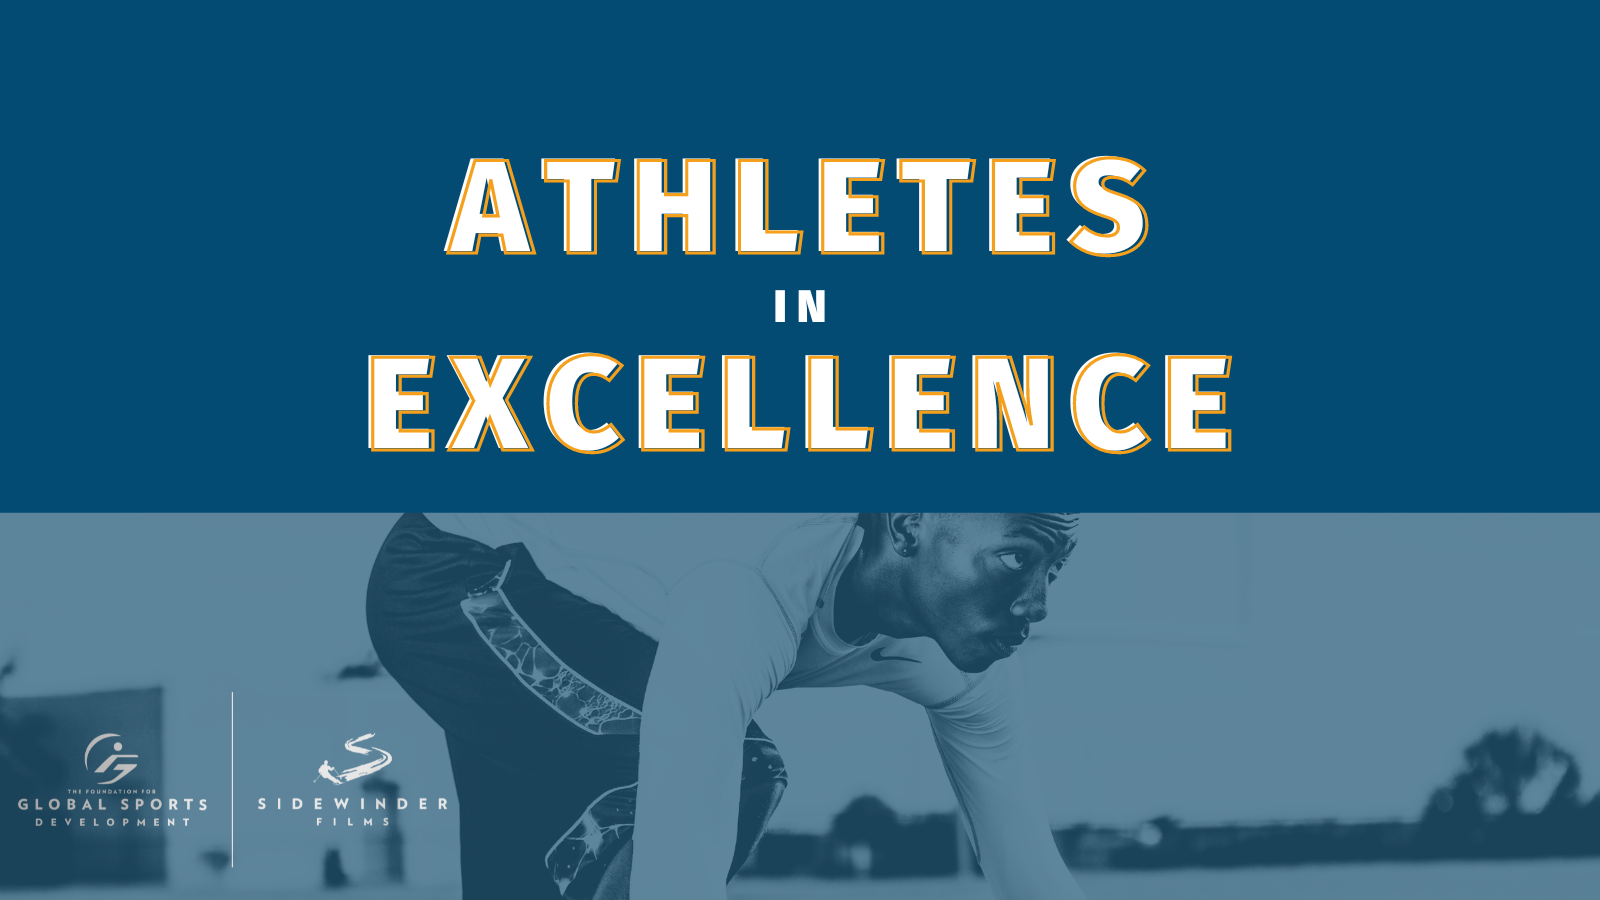 Winners Announced for the 7th Athletes in Excellence Award from The Foundation for Global Sports Development